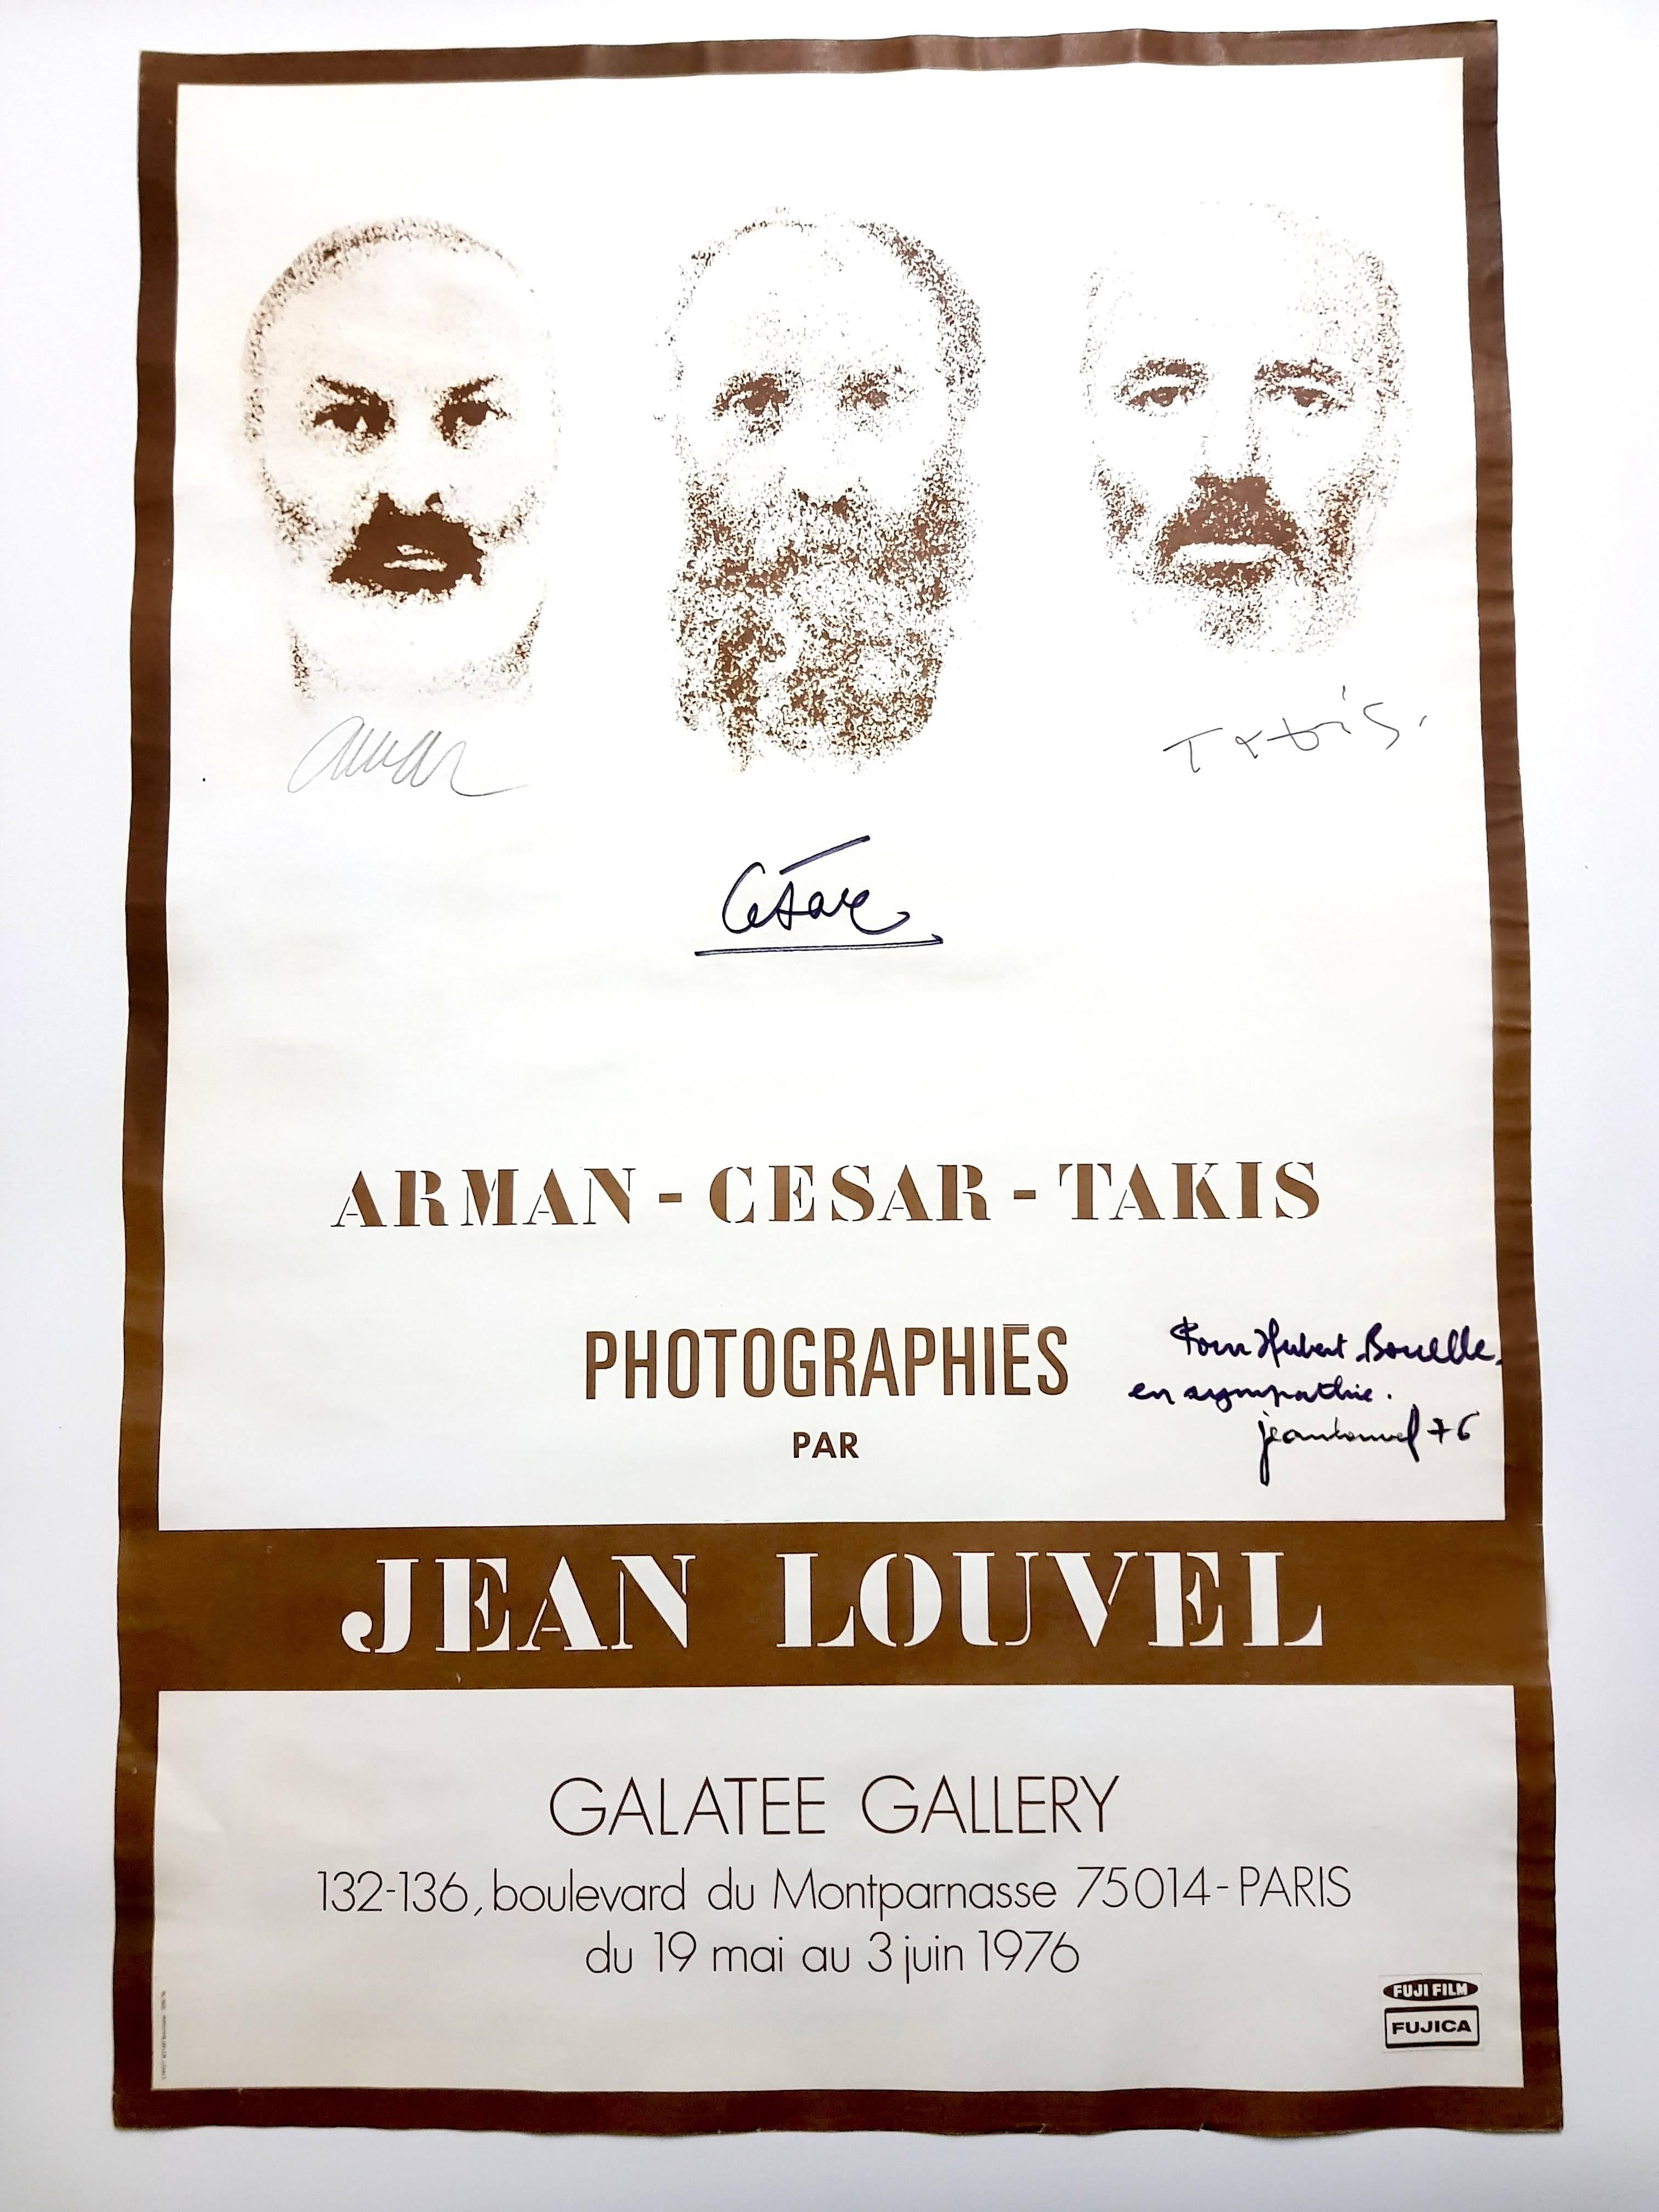 César, Arman, Takis - Signed Original Exhibition Poster - Signed by All - Gray Animal Art by César Baldaccini